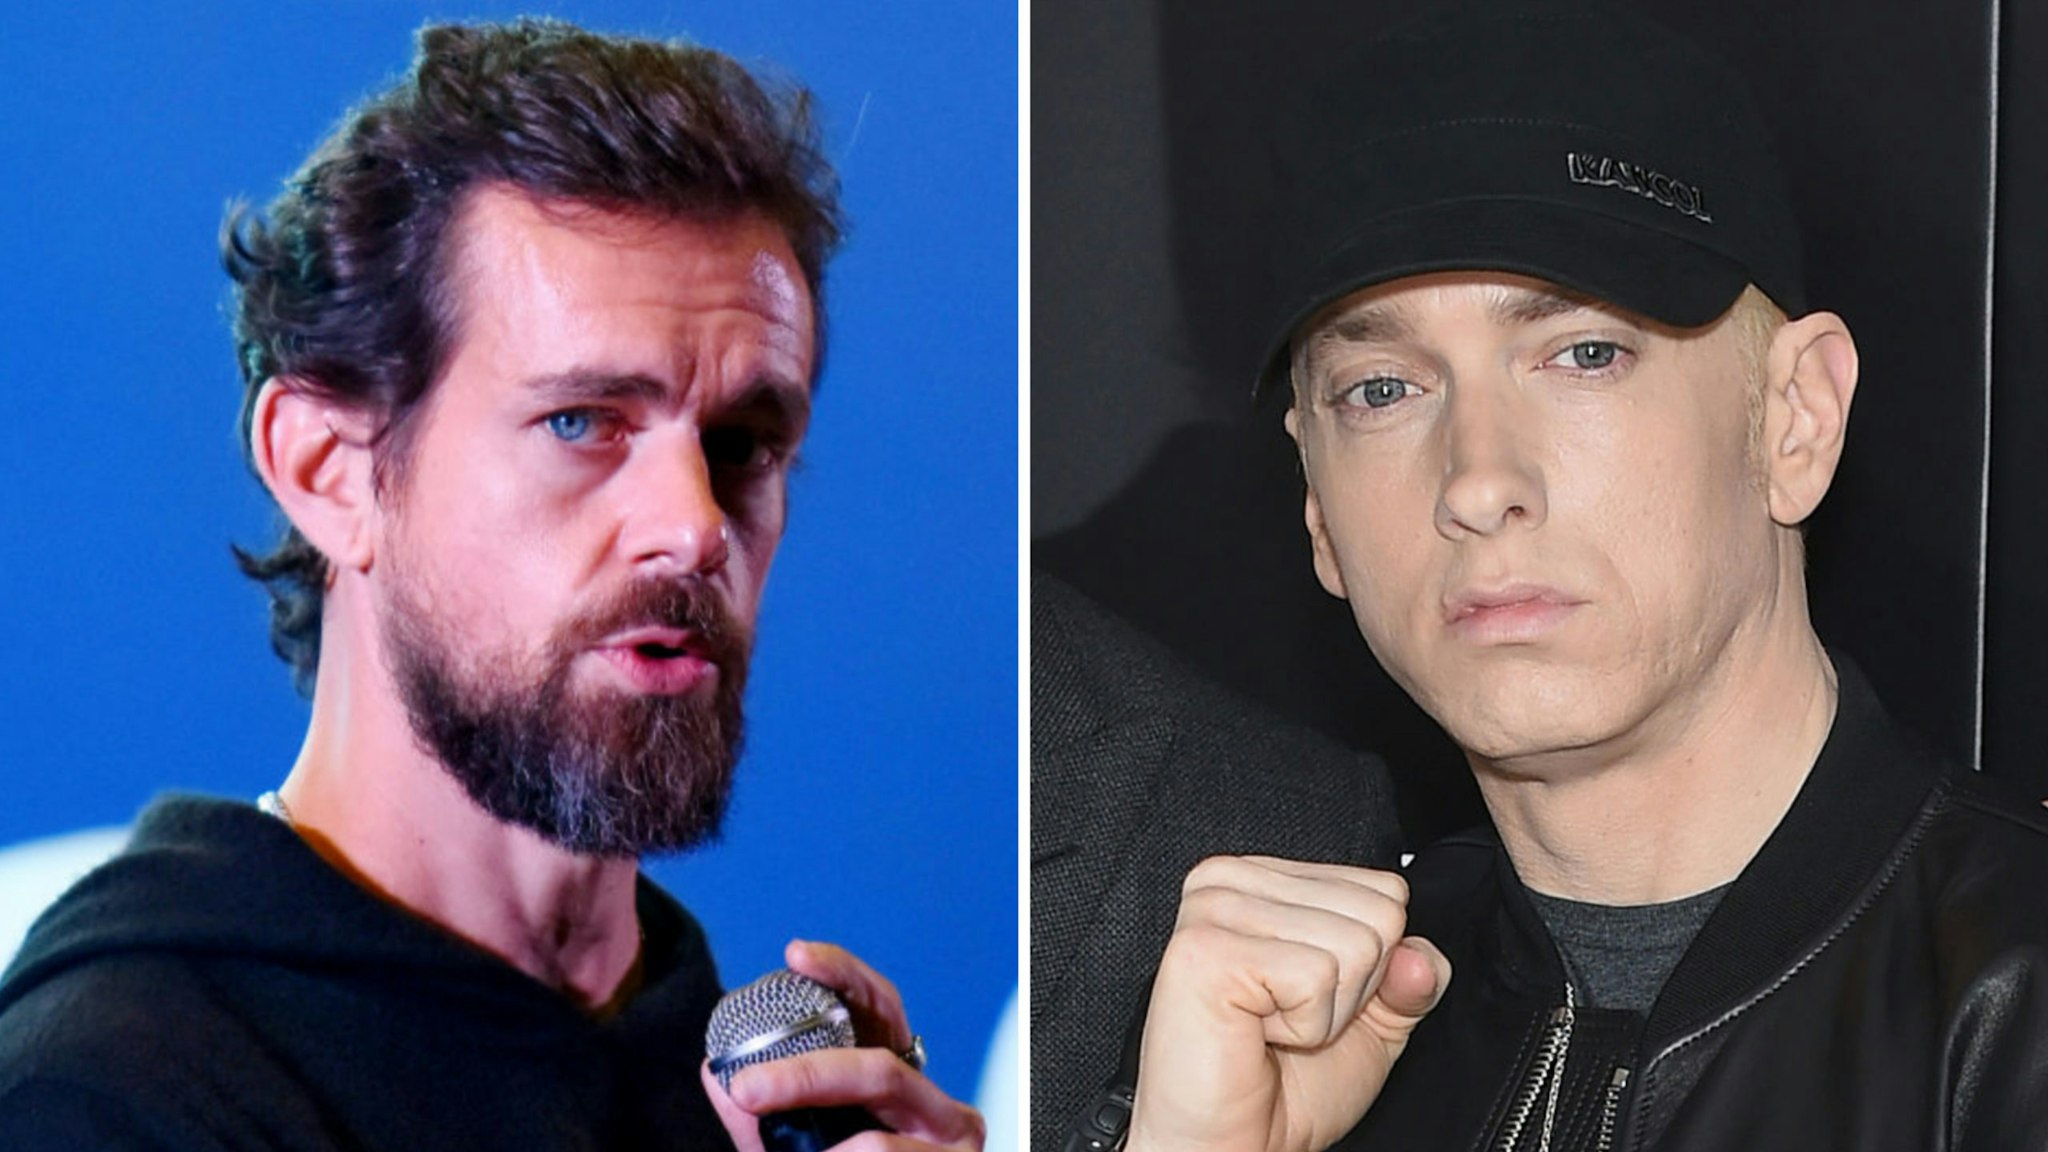 Twitter CEO and Co Founder, Jack Dorsey addresses students at the Indian Institute of Technology (IIT), on November 12, 2018 in New Delhi, India...Eminem attends the 'Southpaw' New York Premiere at AMC Loews Lincoln Square on July 20, 2015 in New York City.